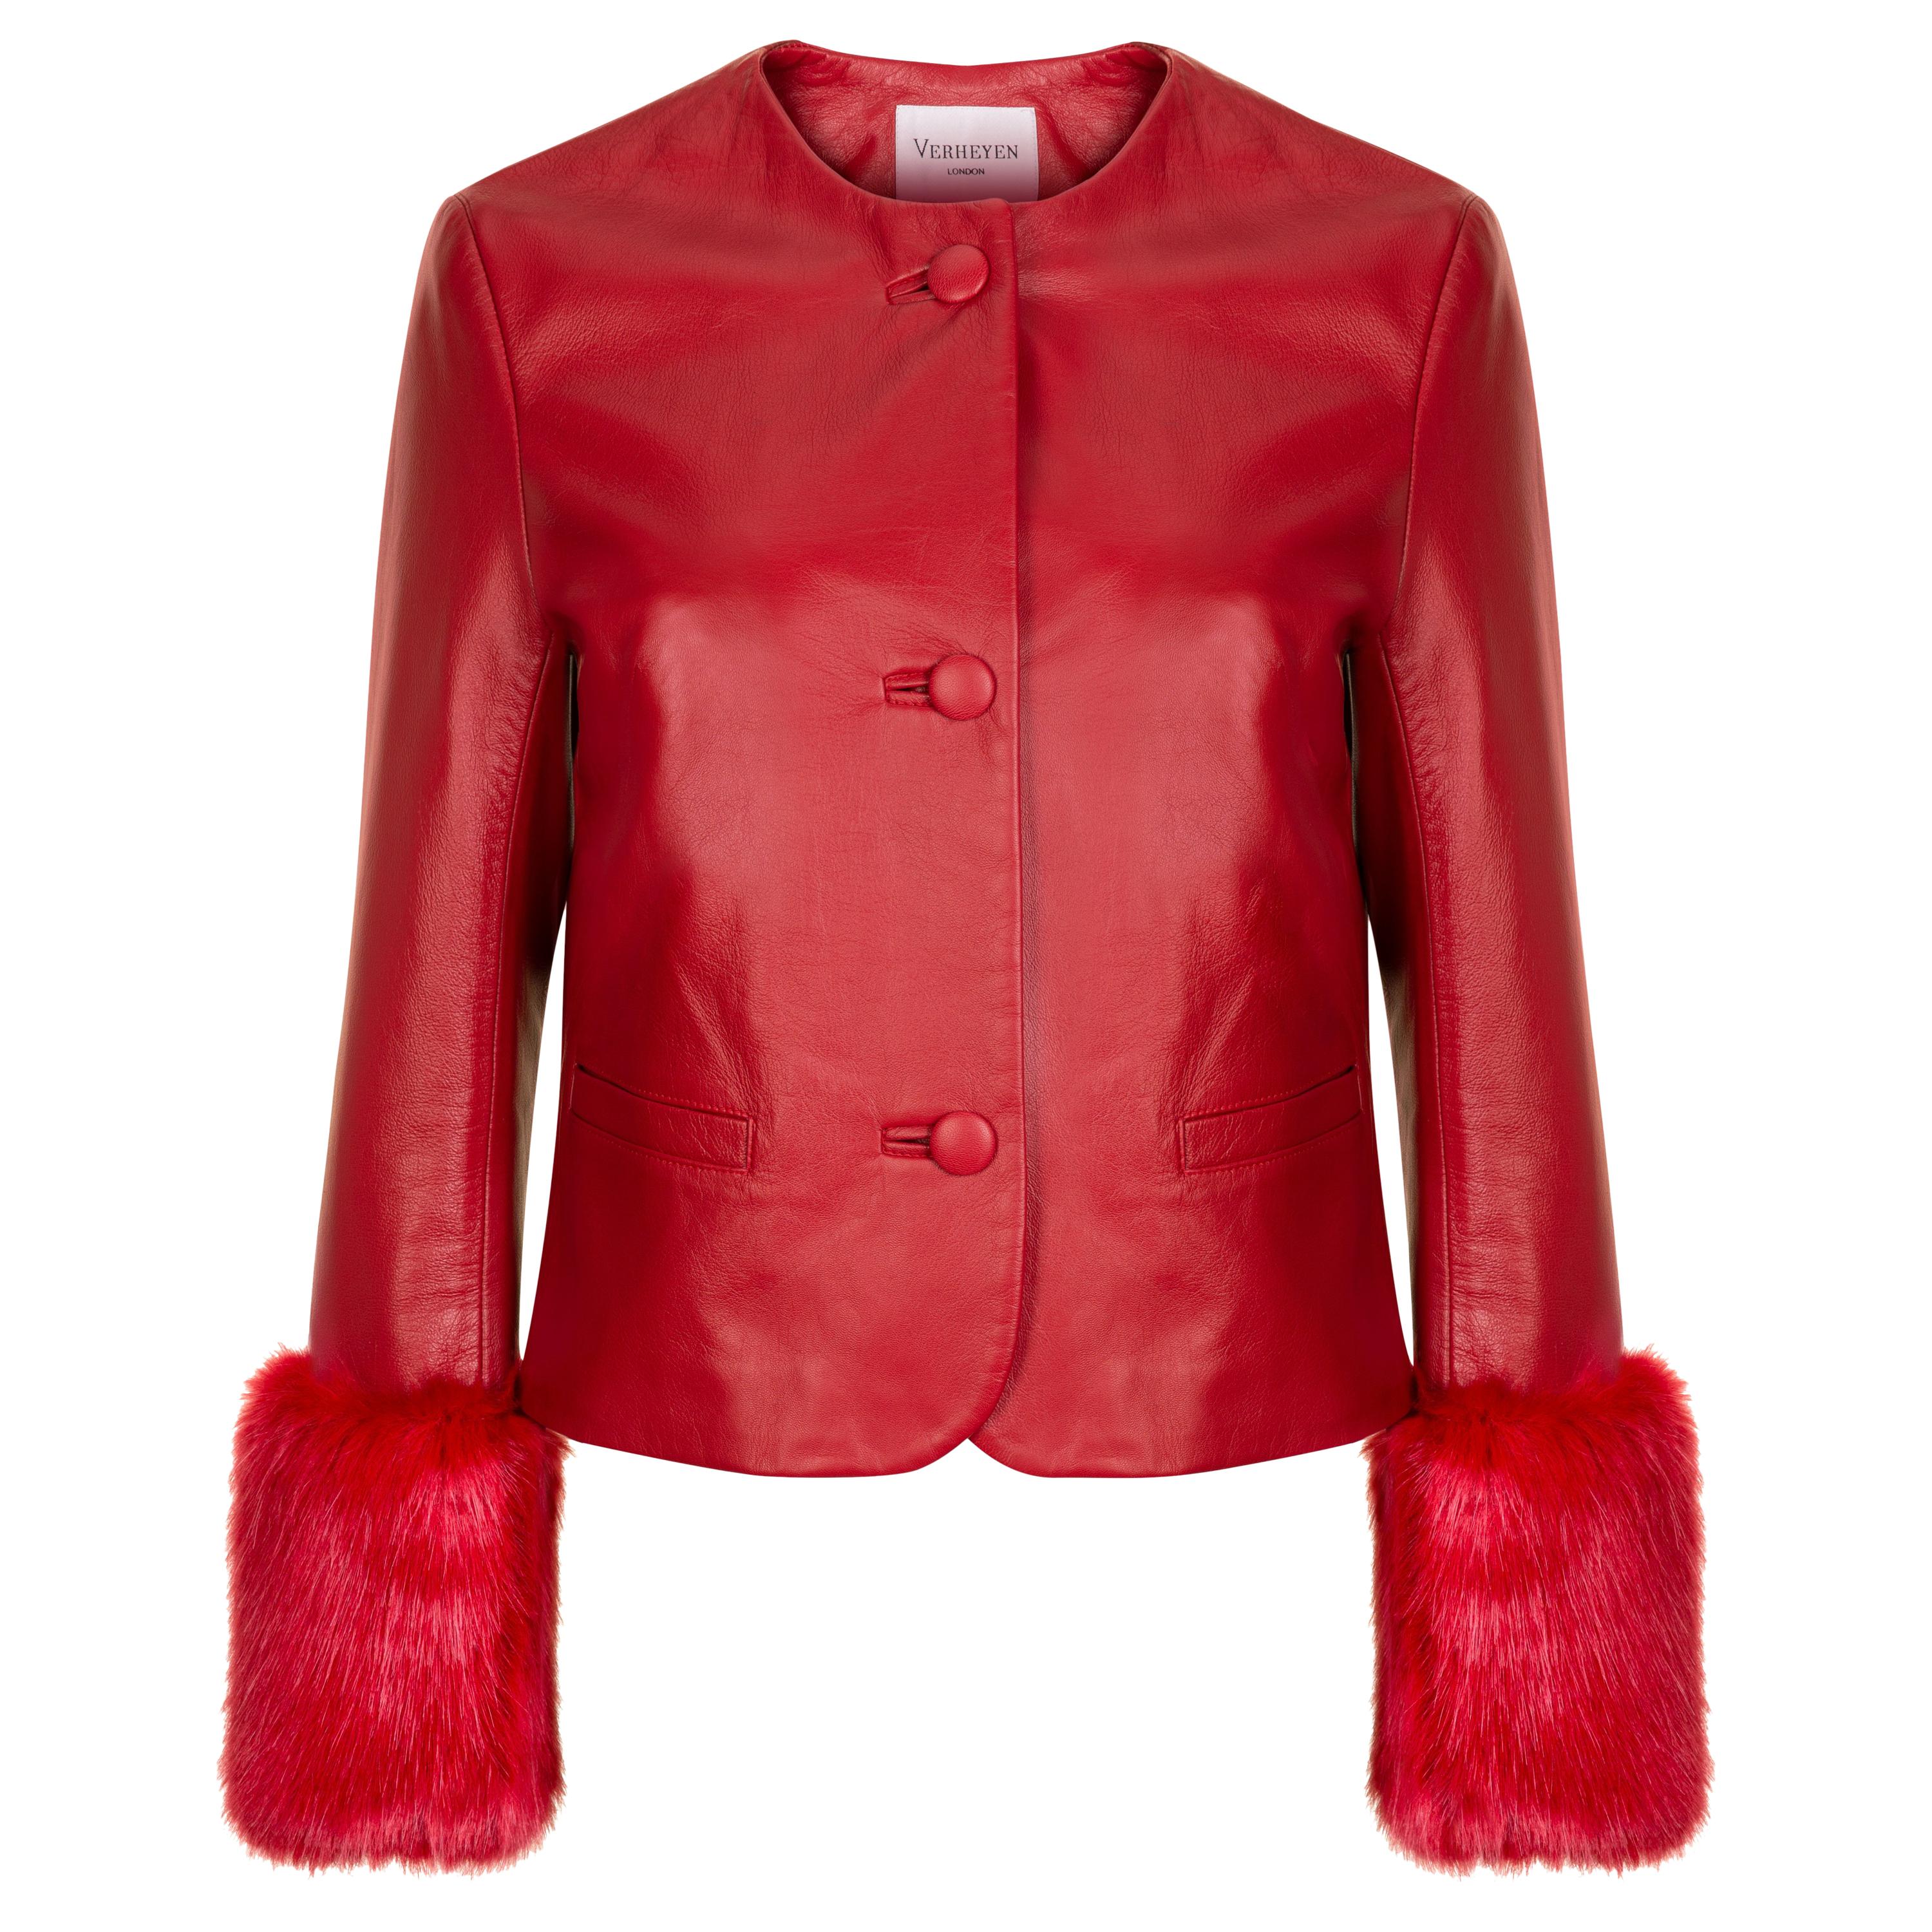 Verheyen Vita Cropped Jacket in Red Leather with Faux Fur - Size uk 14 For Sale